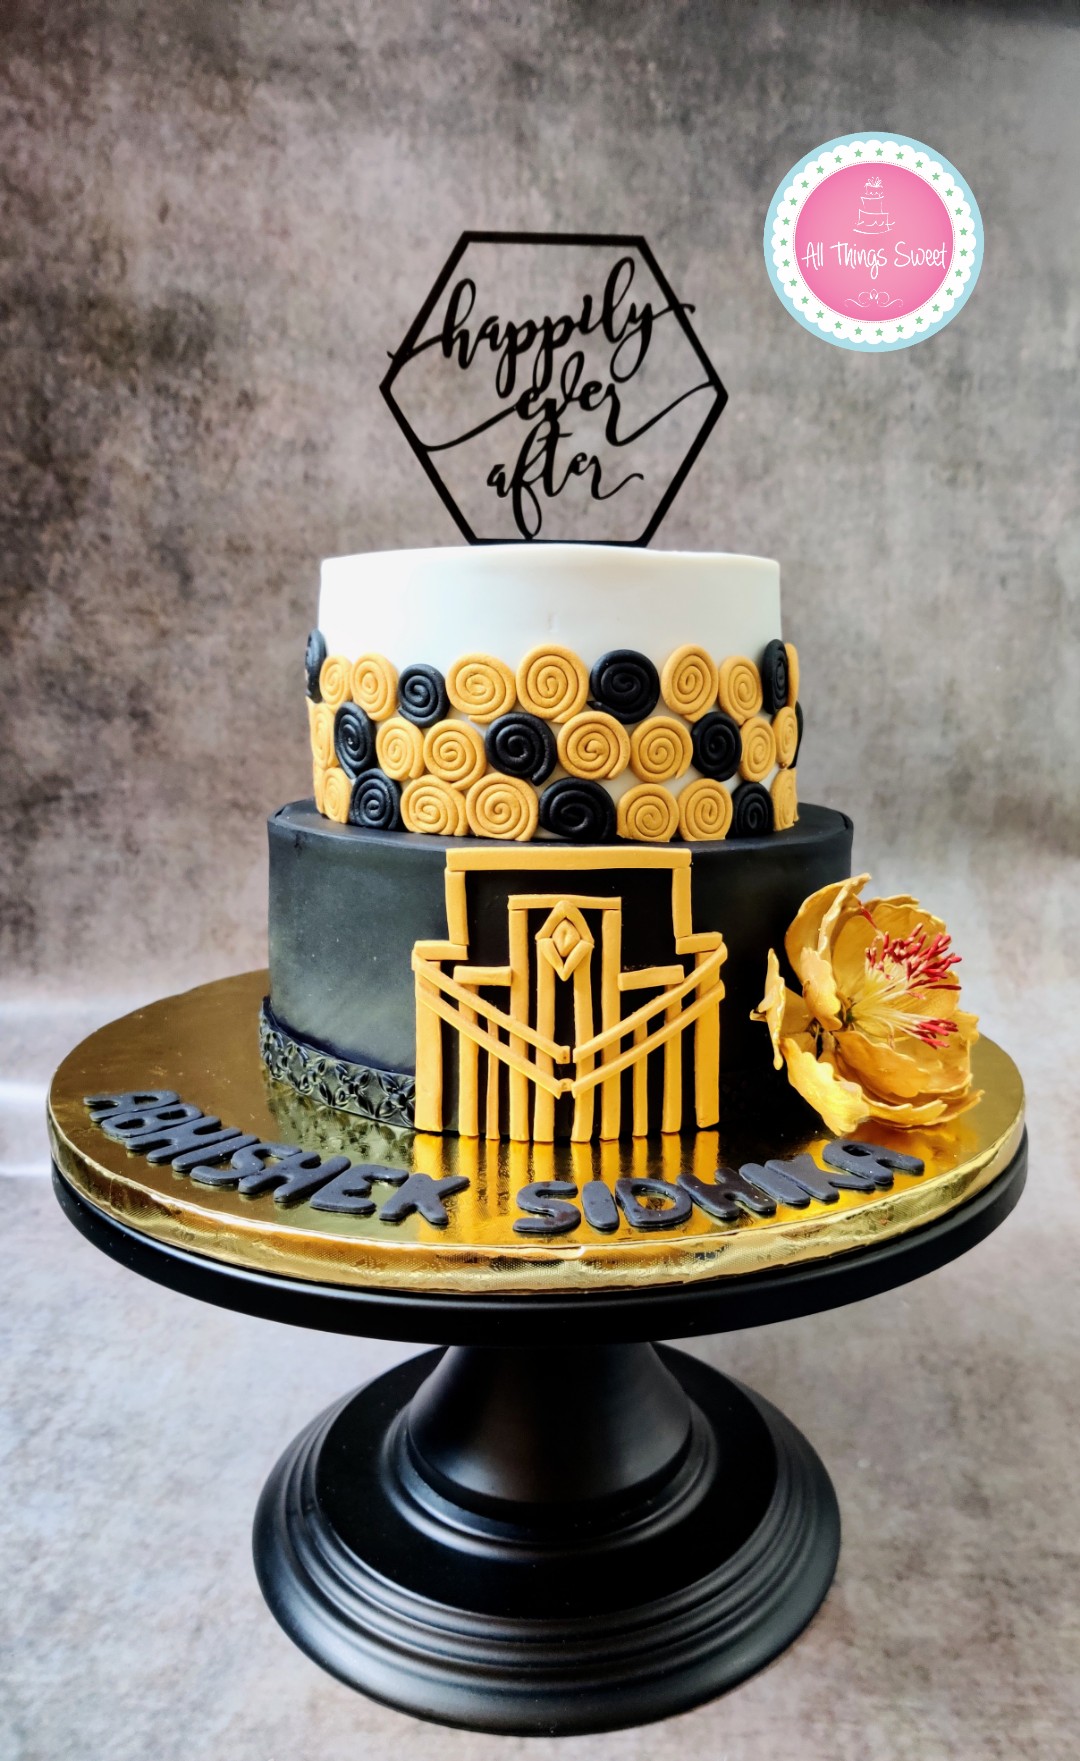 Delhi's top wedding cake shops that you will love! - Get Inspiring Ideas  for Planning Your Perfect Wedding at fabweddings